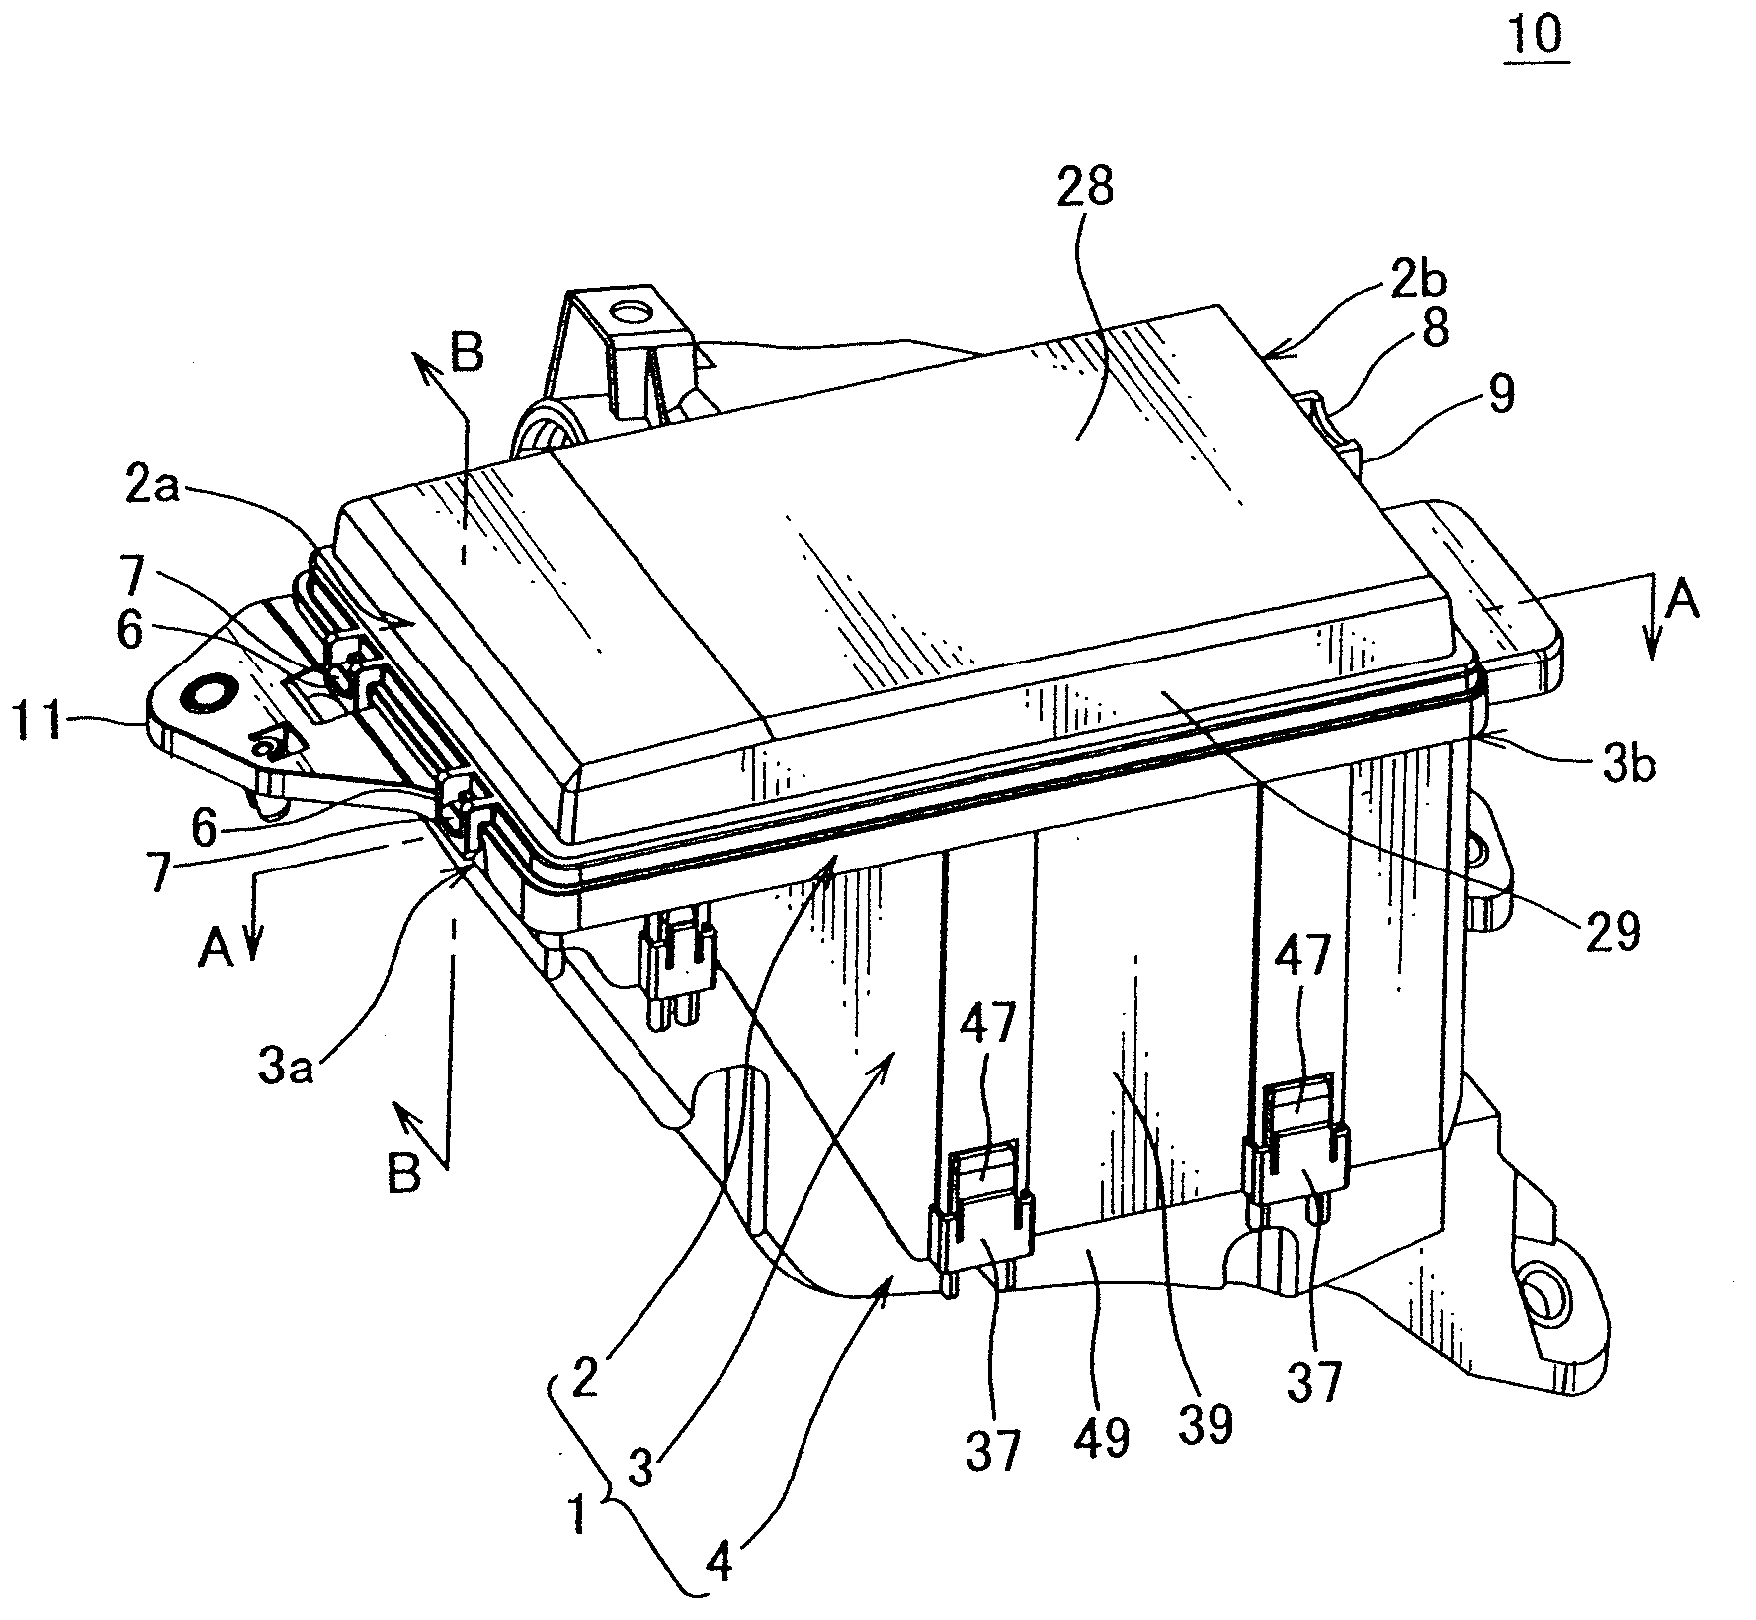 Waterproof box and electrical junction box having the same